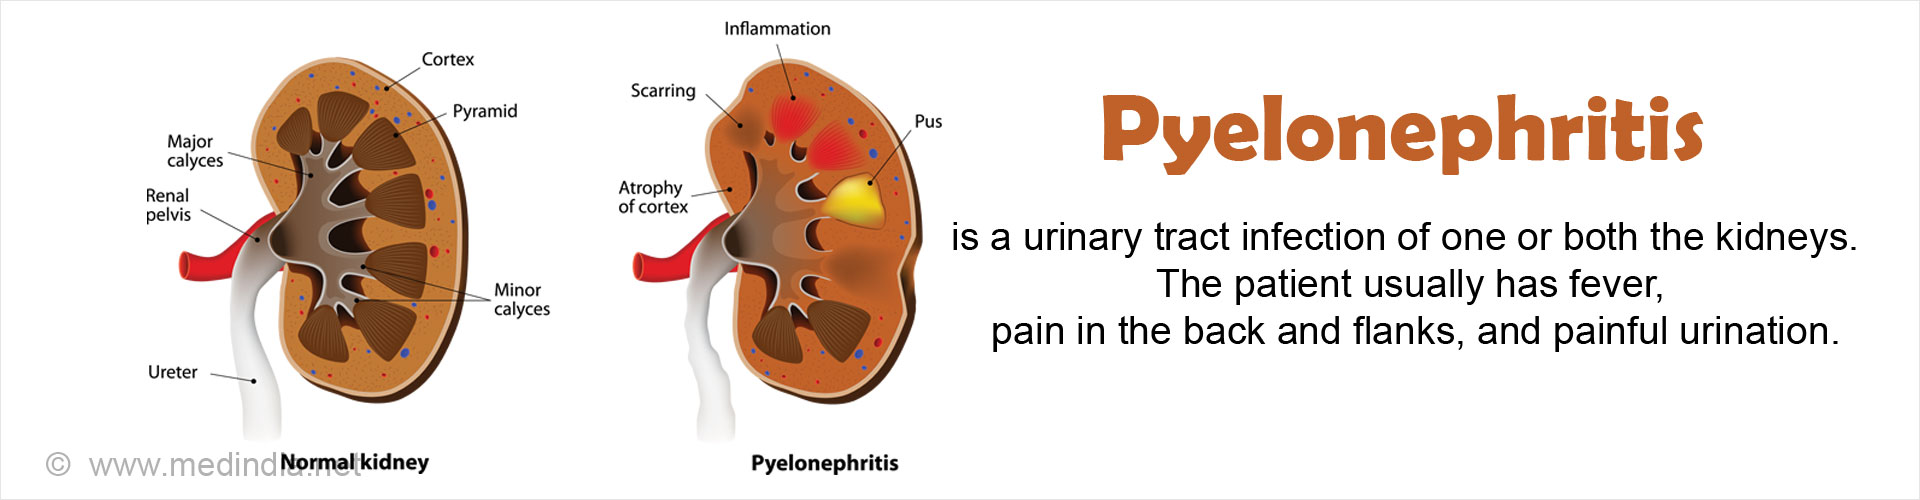 Pyelonephritis is a urinary tract infection of one or both the kidneys. The patient usually has high fever, pain in the back, flanks and painful urination